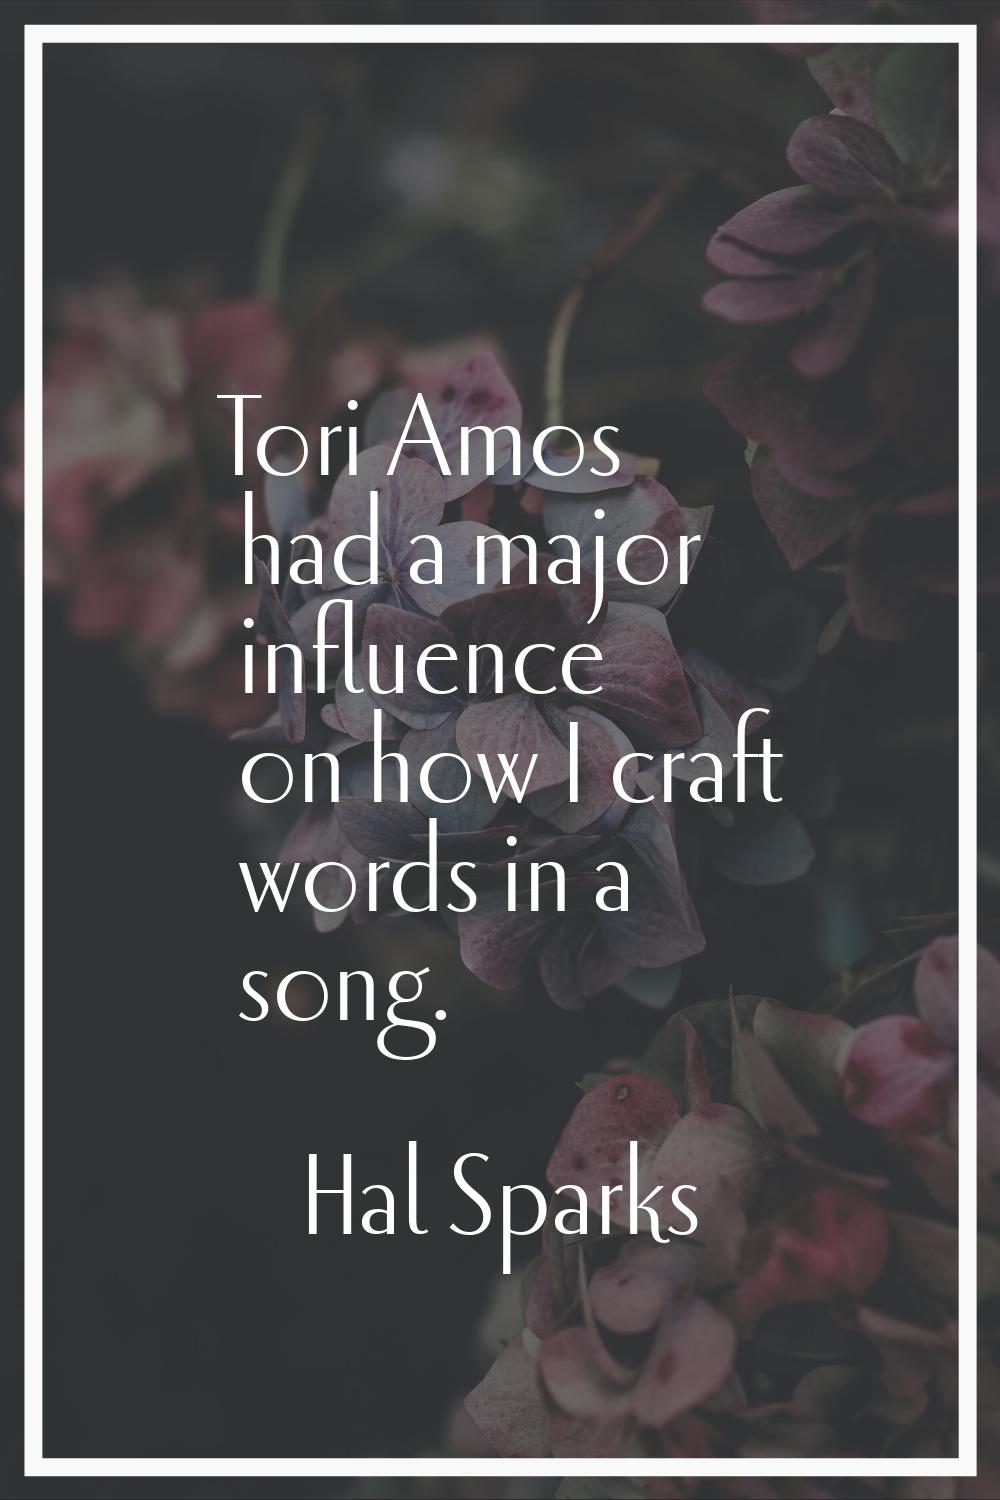 Tori Amos had a major influence on how I craft words in a song.